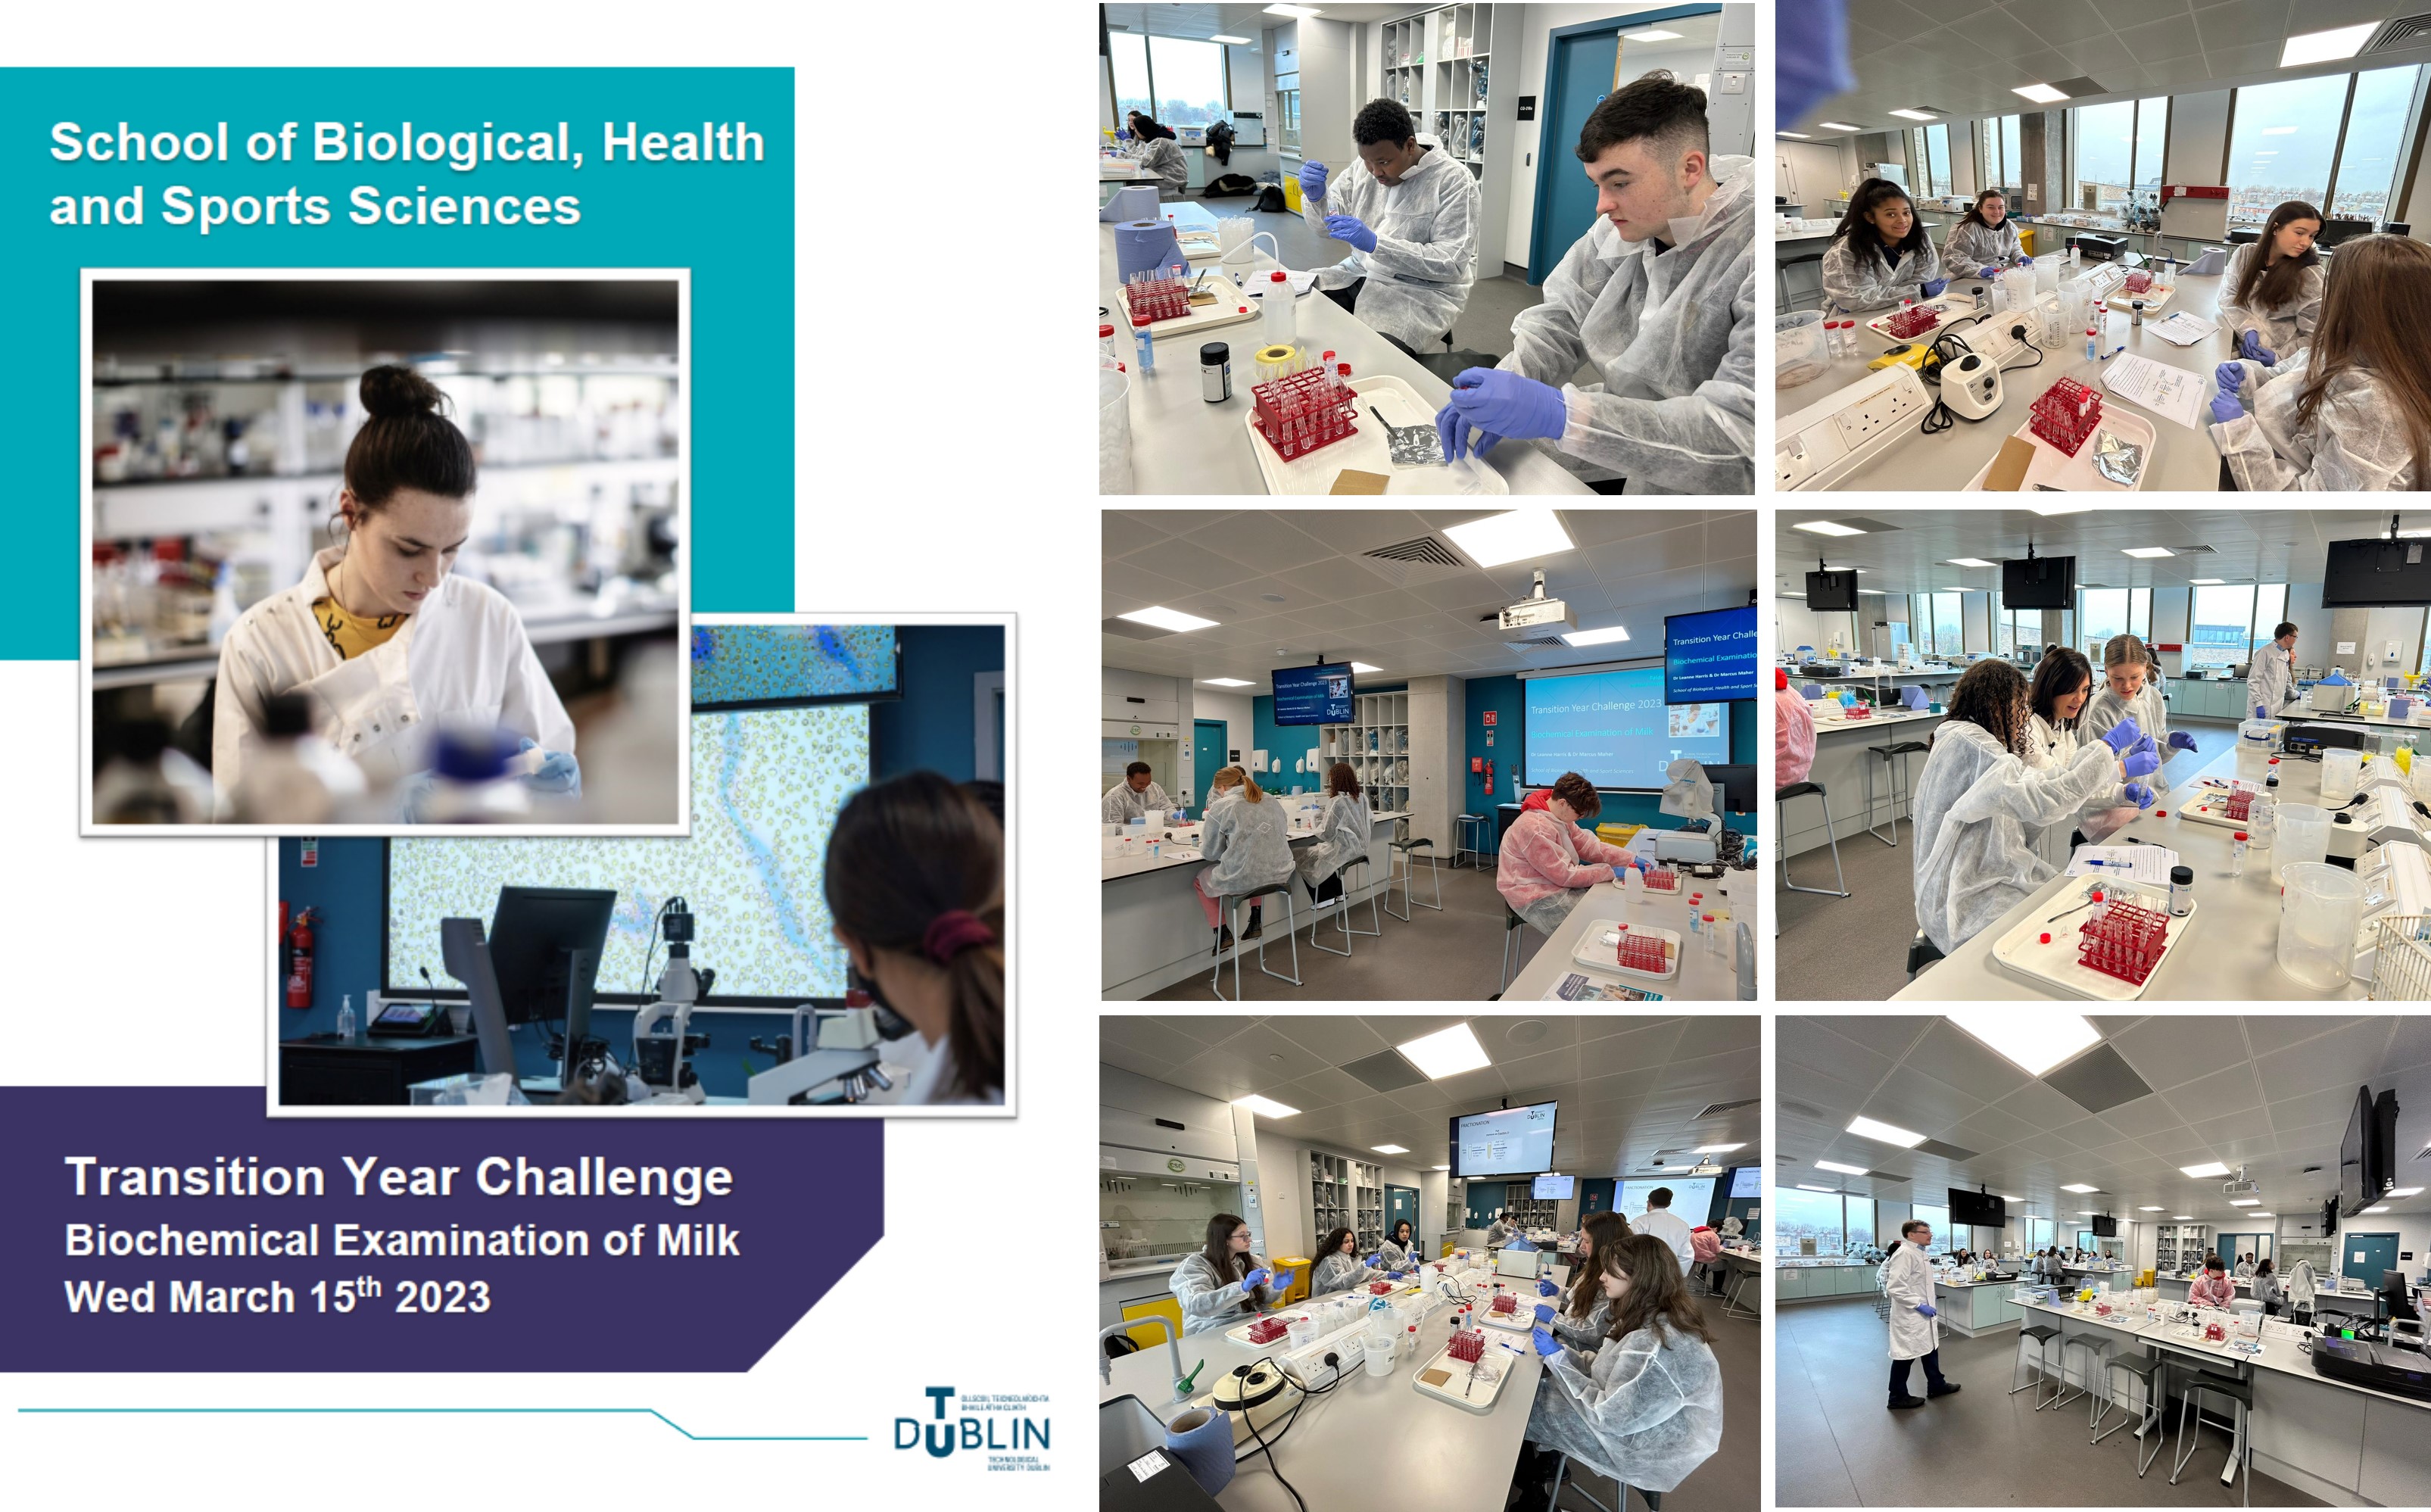 School of Biological, Health, and Sports Sciences TY Challenge 2023